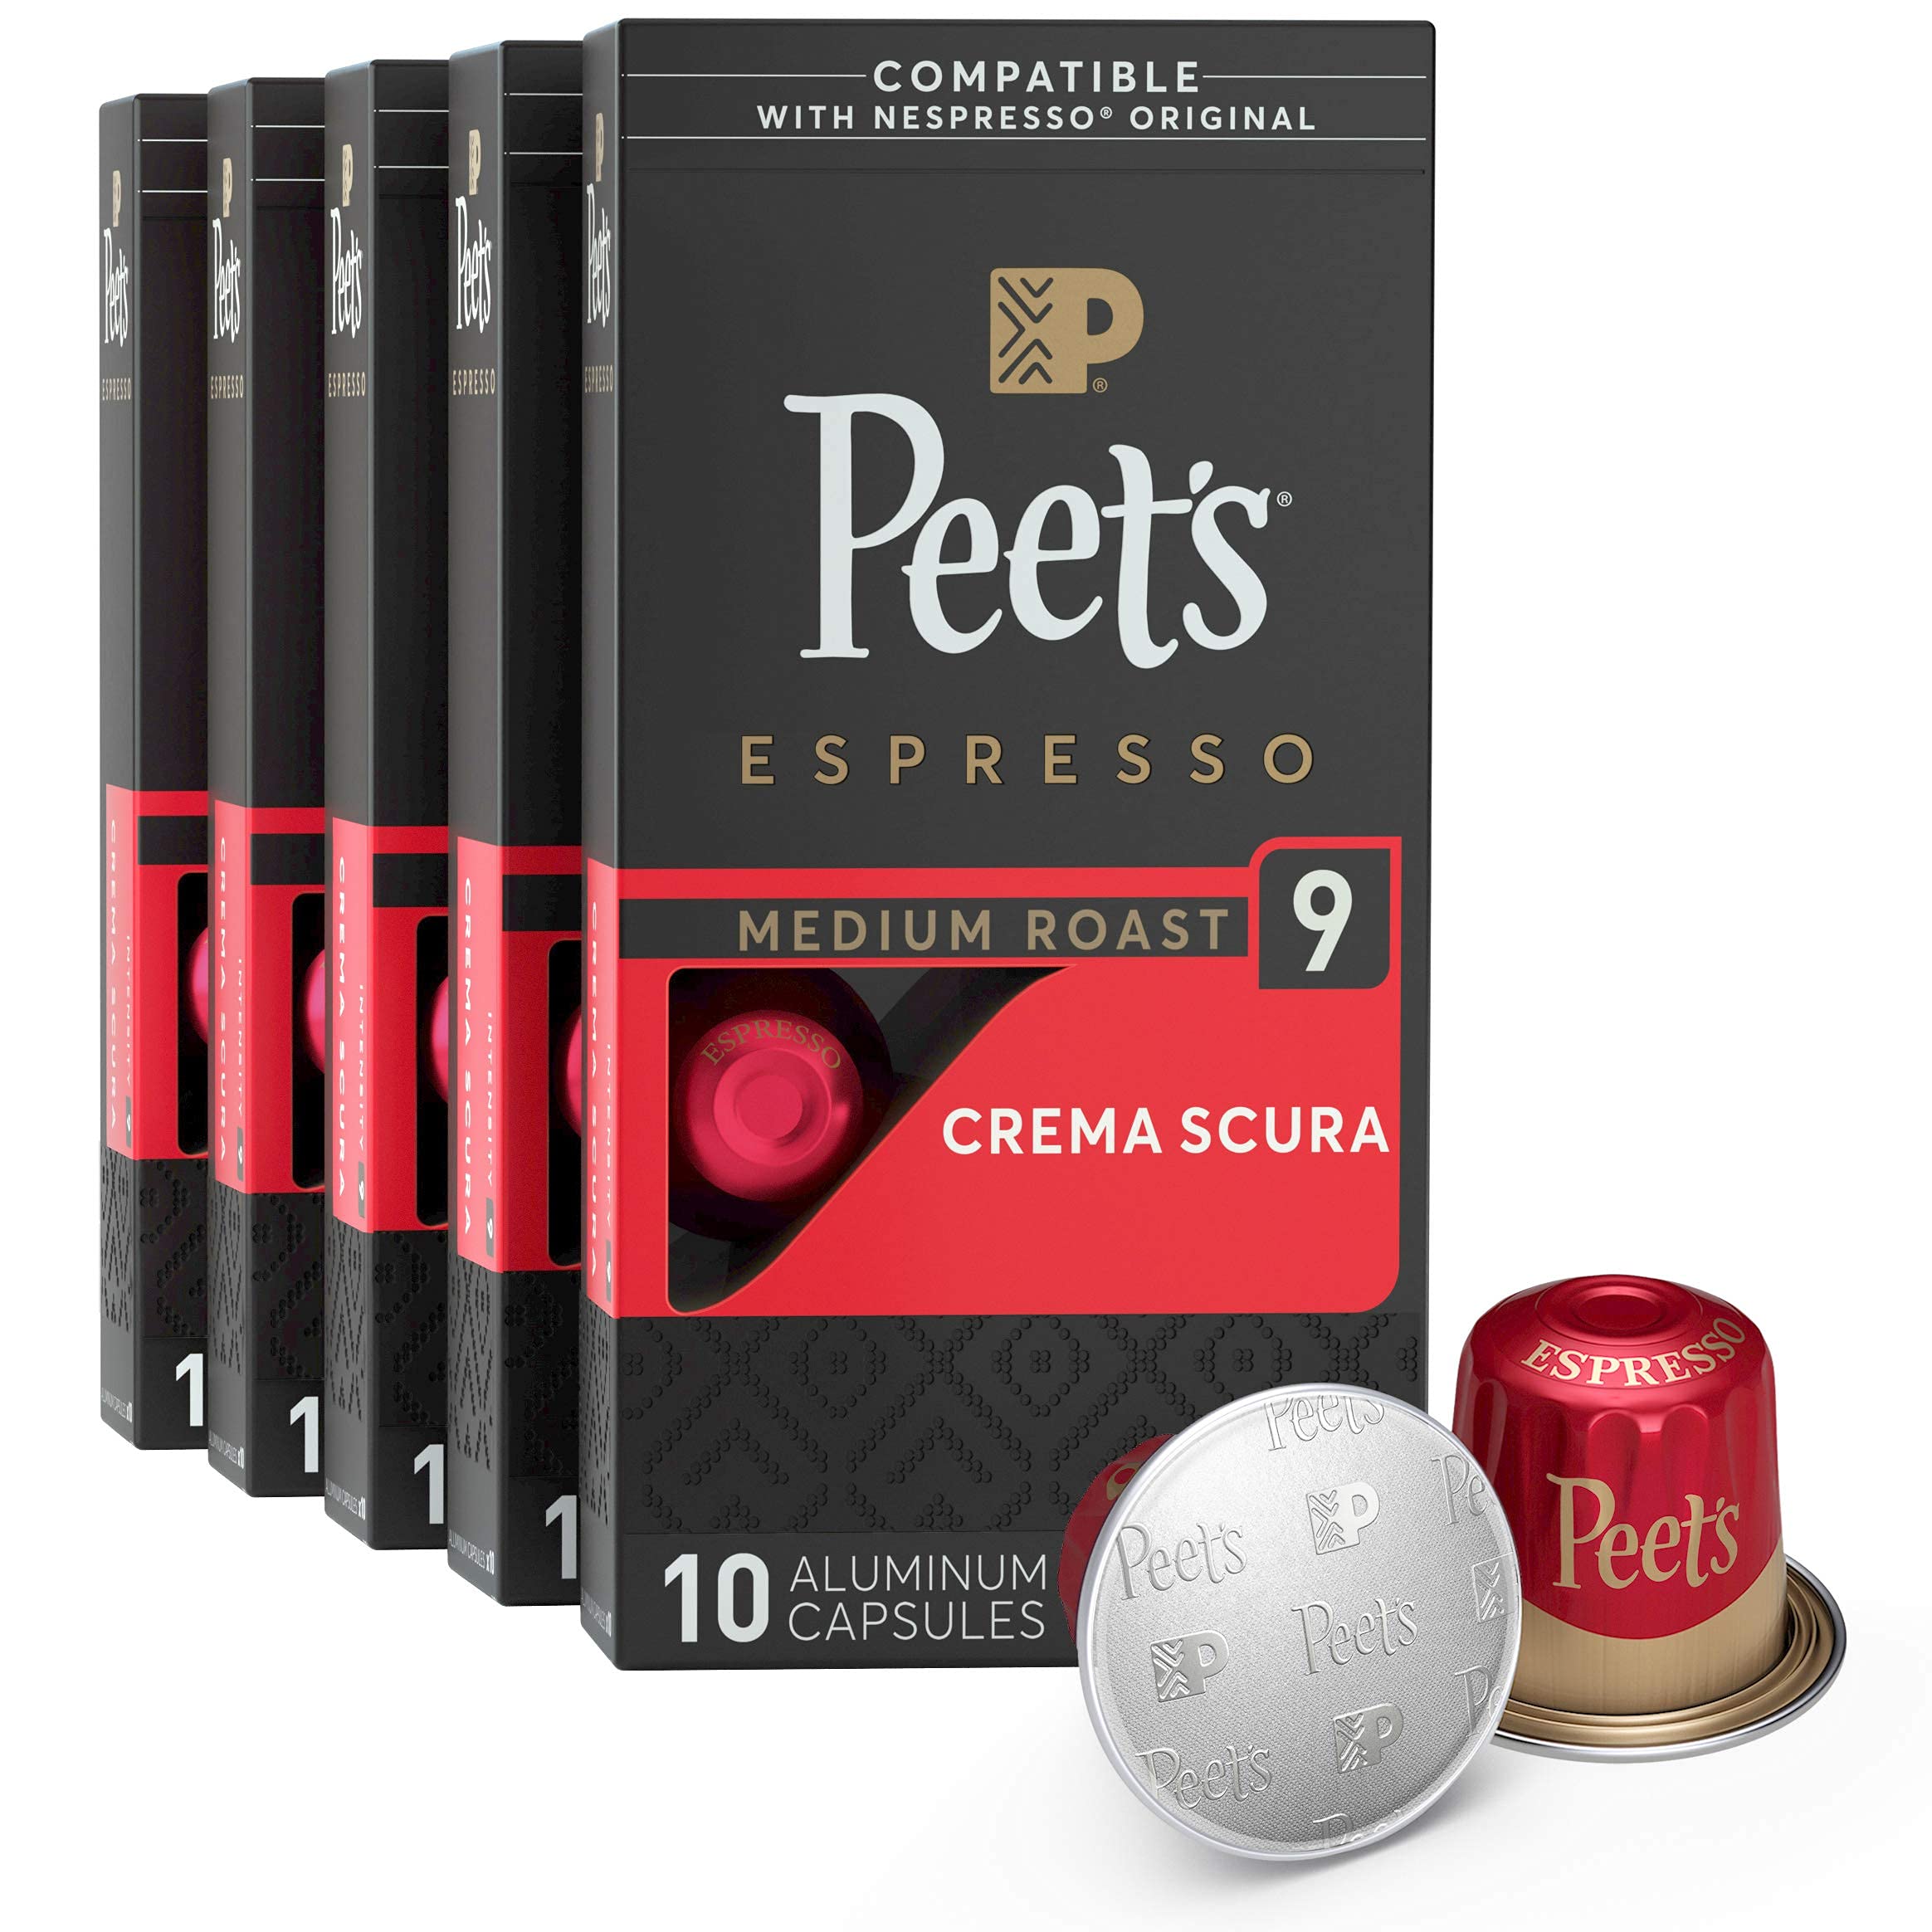 50-Count Peet's Coffee Medium Roast Espresso Pods (Crema Scura Intensity 9) $20.65 (.41c Ea) w/ S&S and More + Free Shipping w/ Prime or on $35+